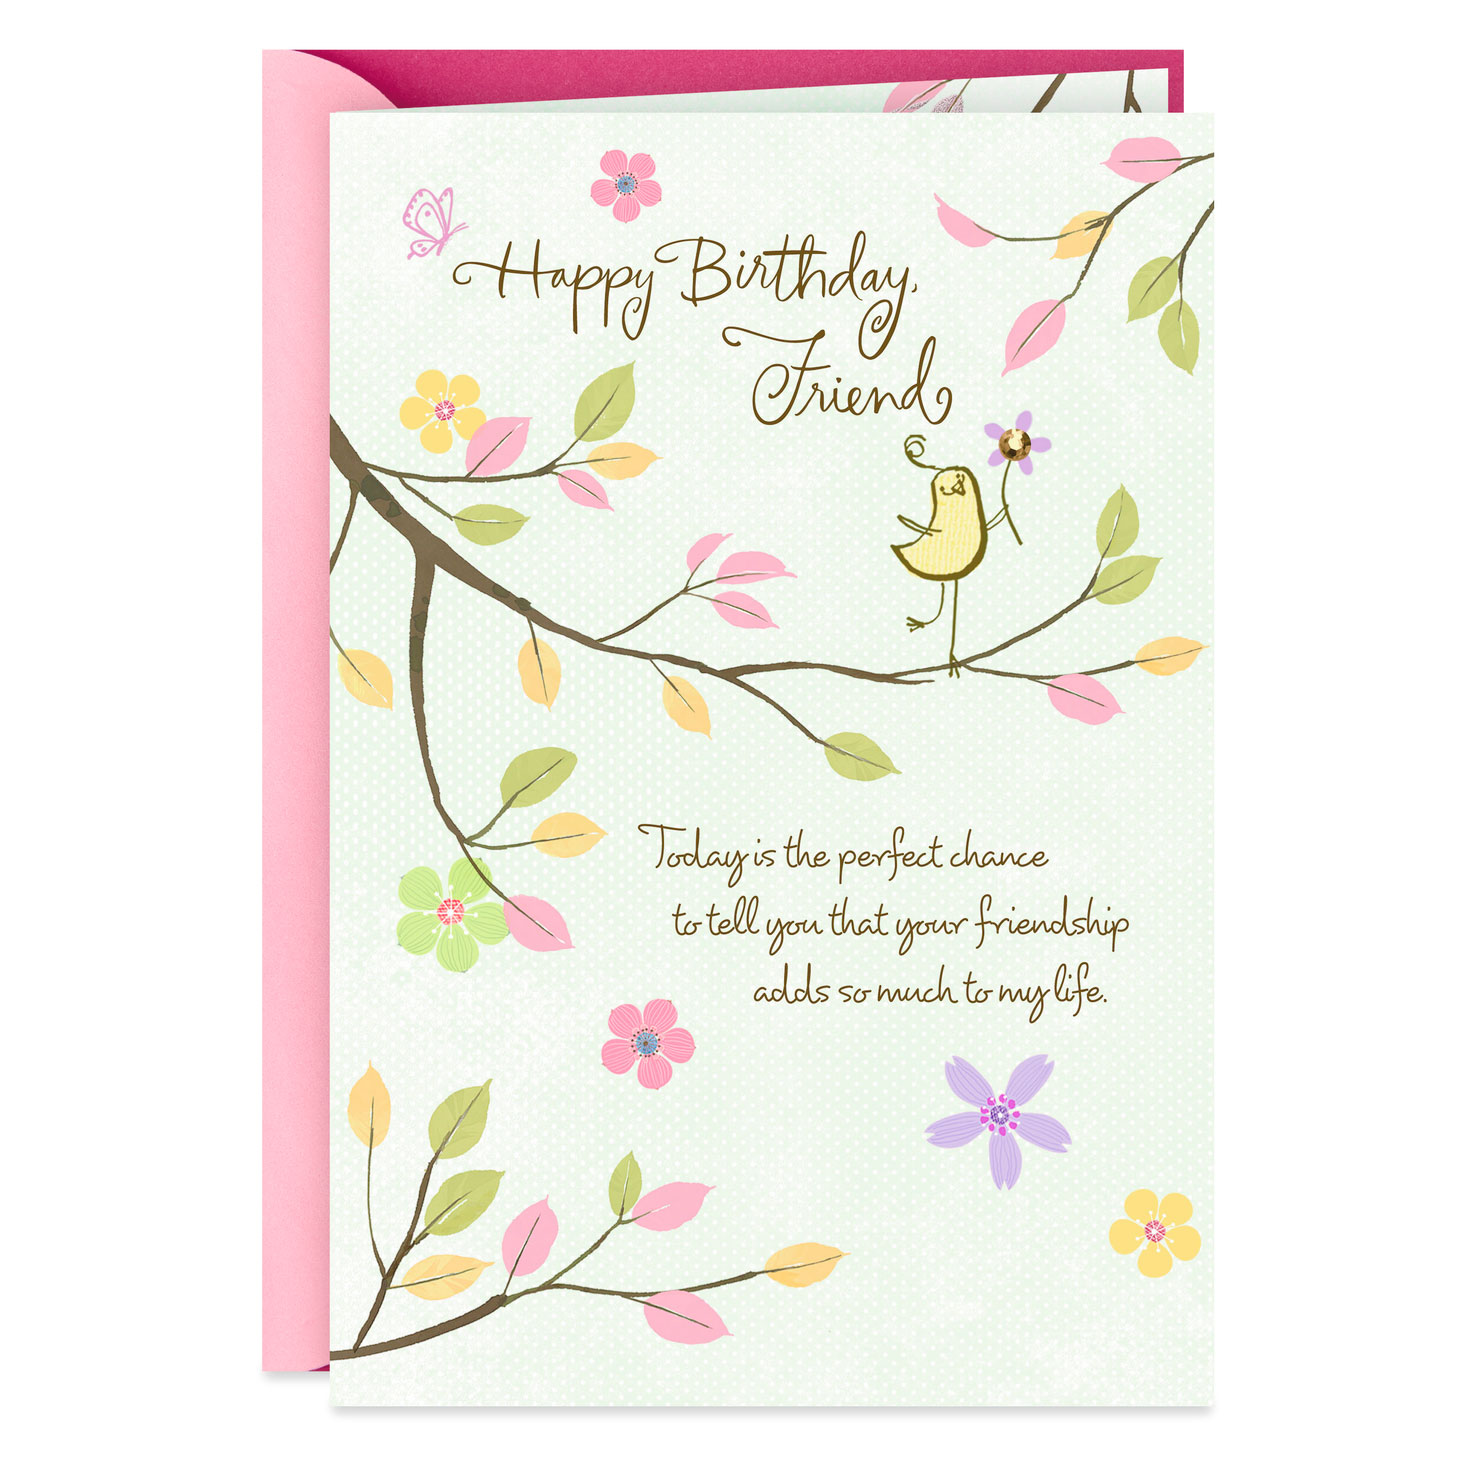 Thankful Friend  Birthday  Wishes  Card  Greeting Cards  